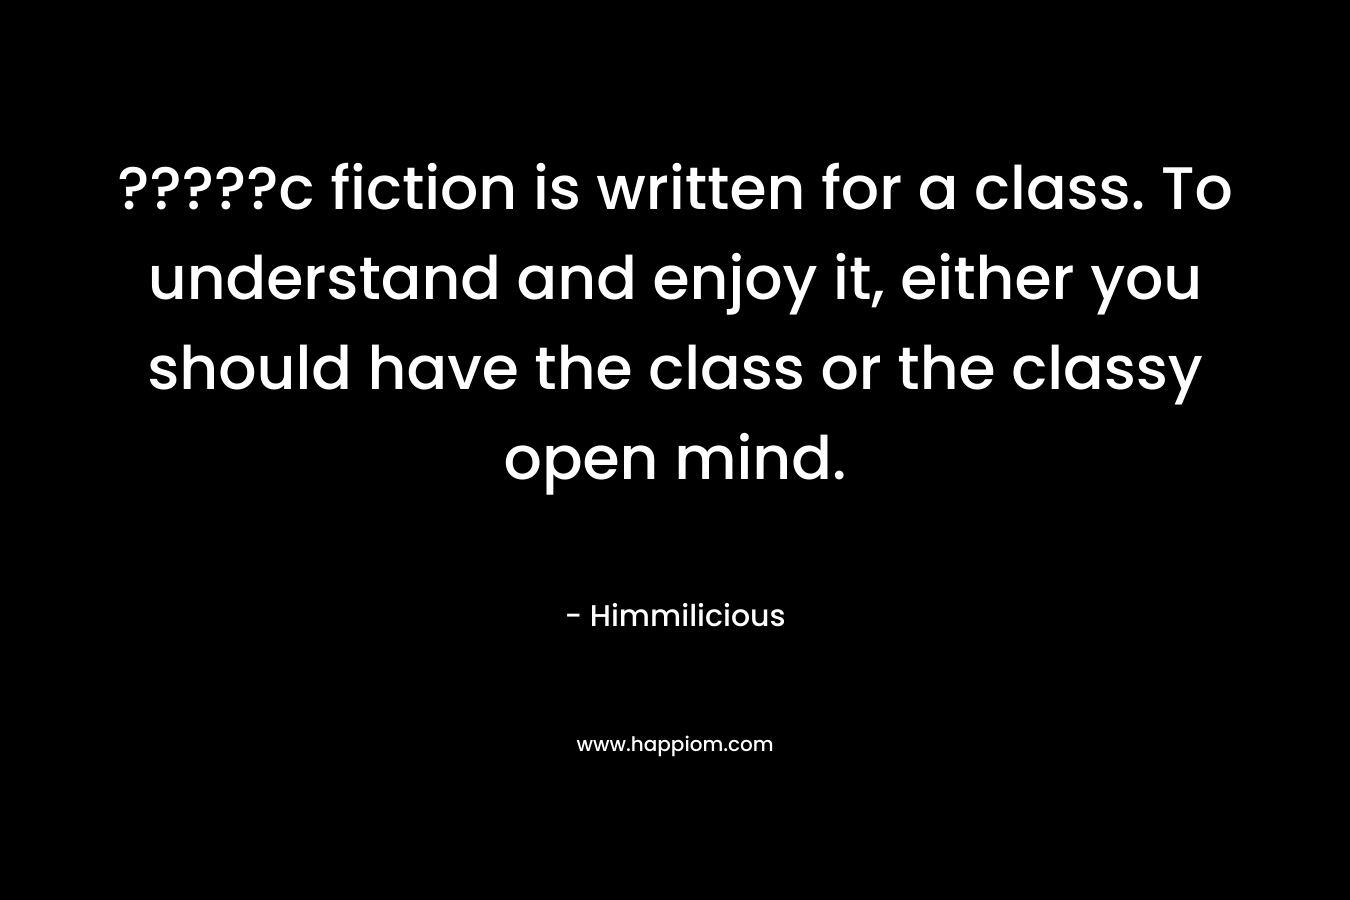 ?????c fiction is written for a class. To understand and enjoy it, either you should have the class or the classy open mind. – Himmilicious